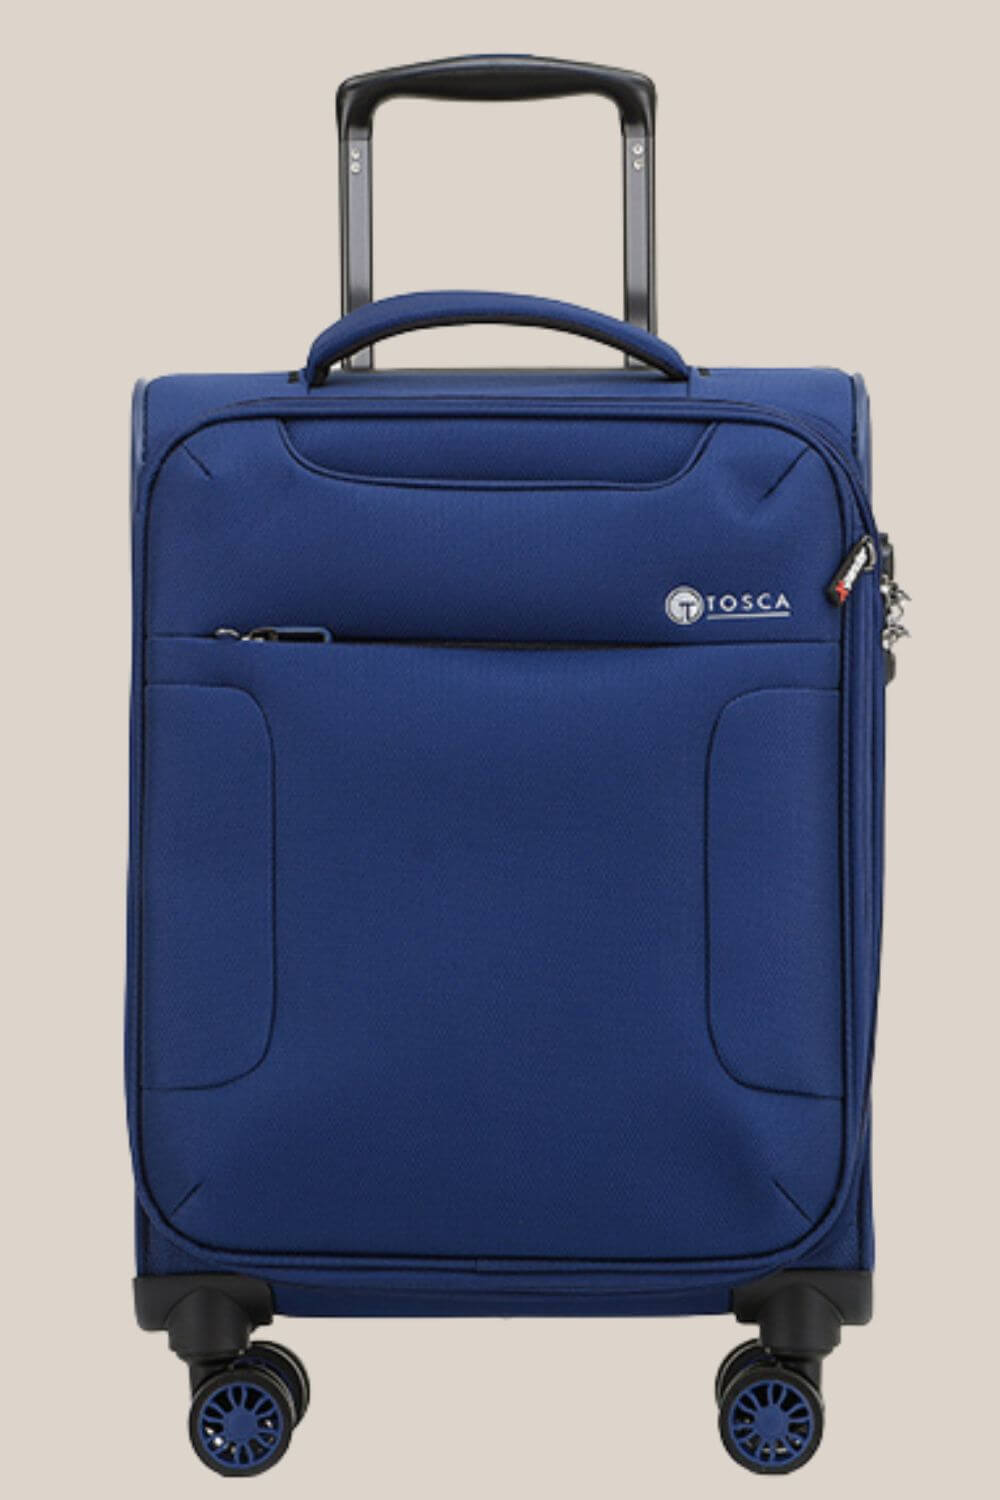 Tosca So-Lite Suitcase 20IN